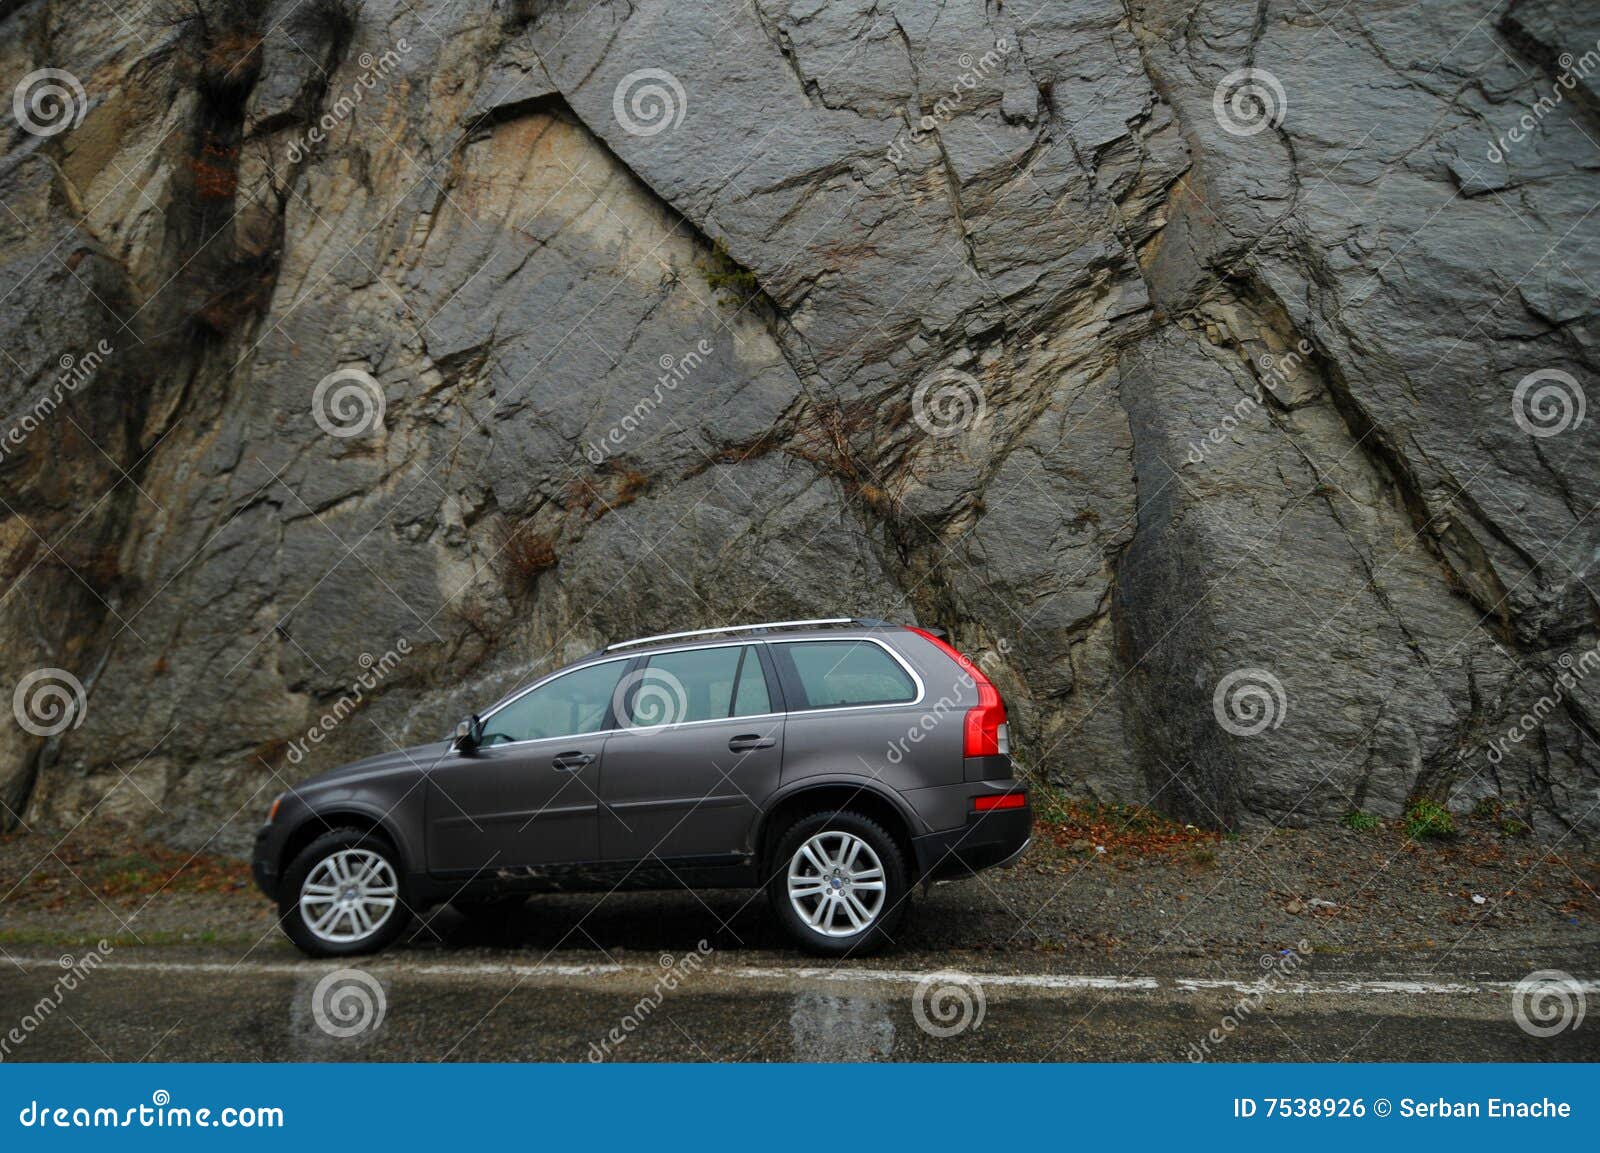 car parked on side of road